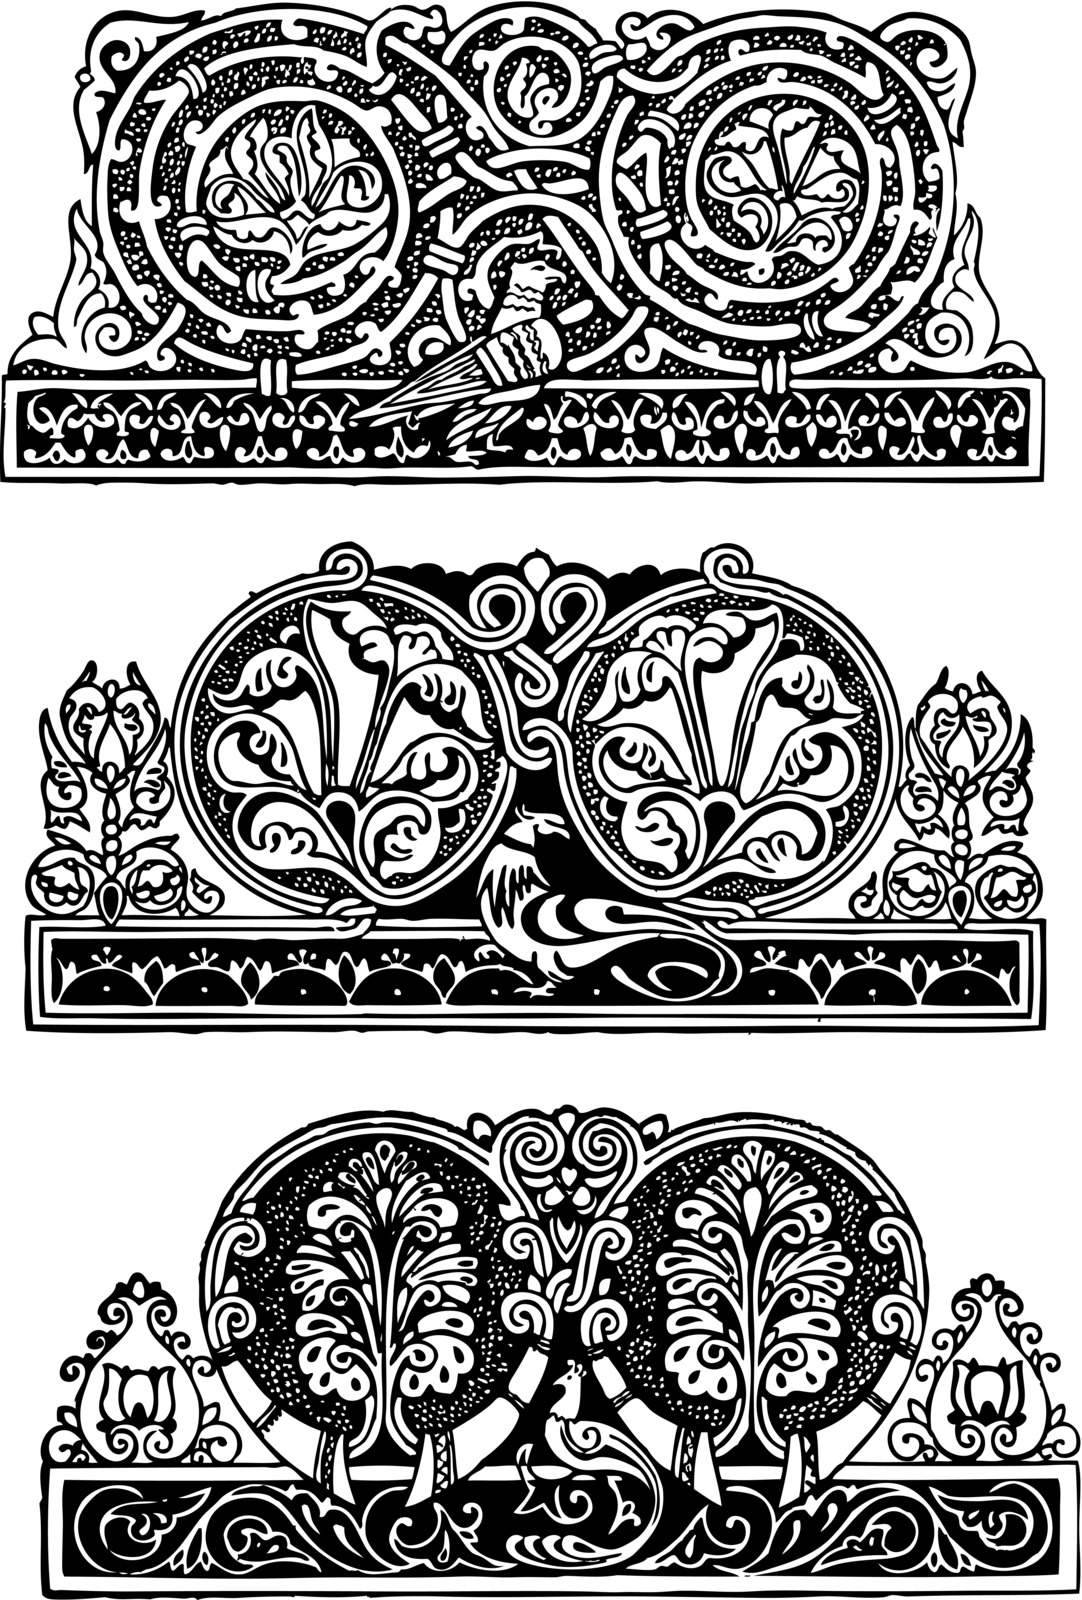 Ornament in the Gothic style by VIPDesignUSA